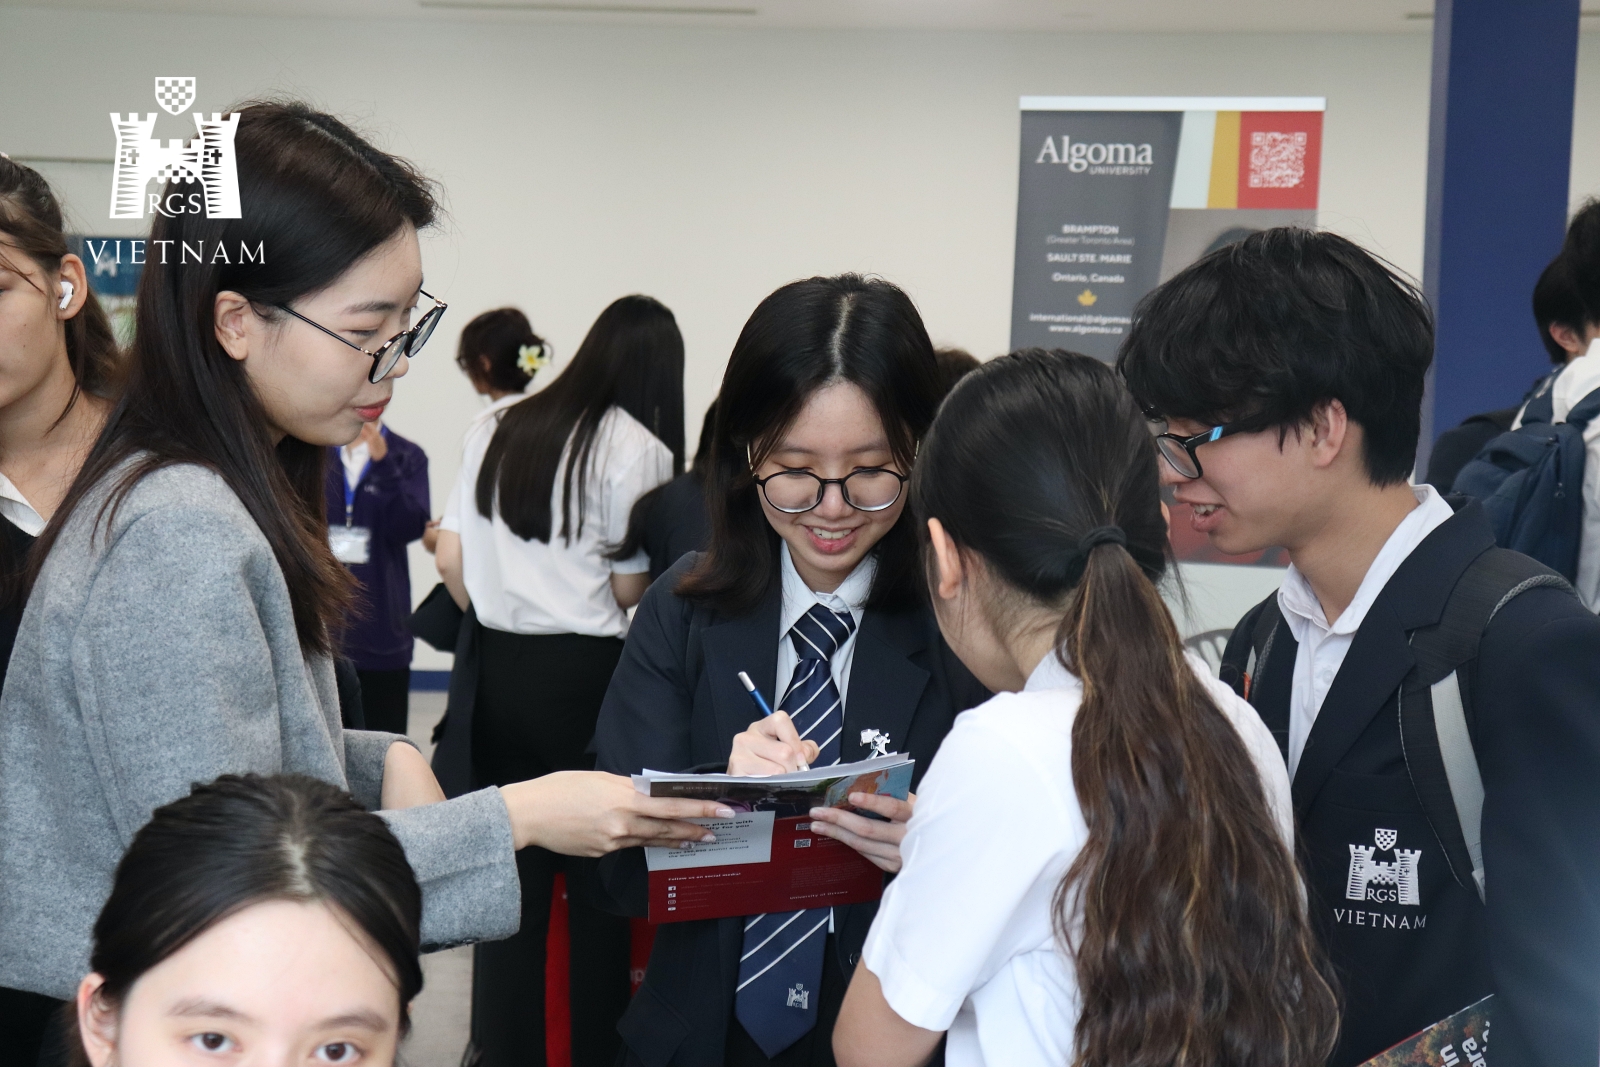 US and Canada Universities Fair for RGSV Secondary Students